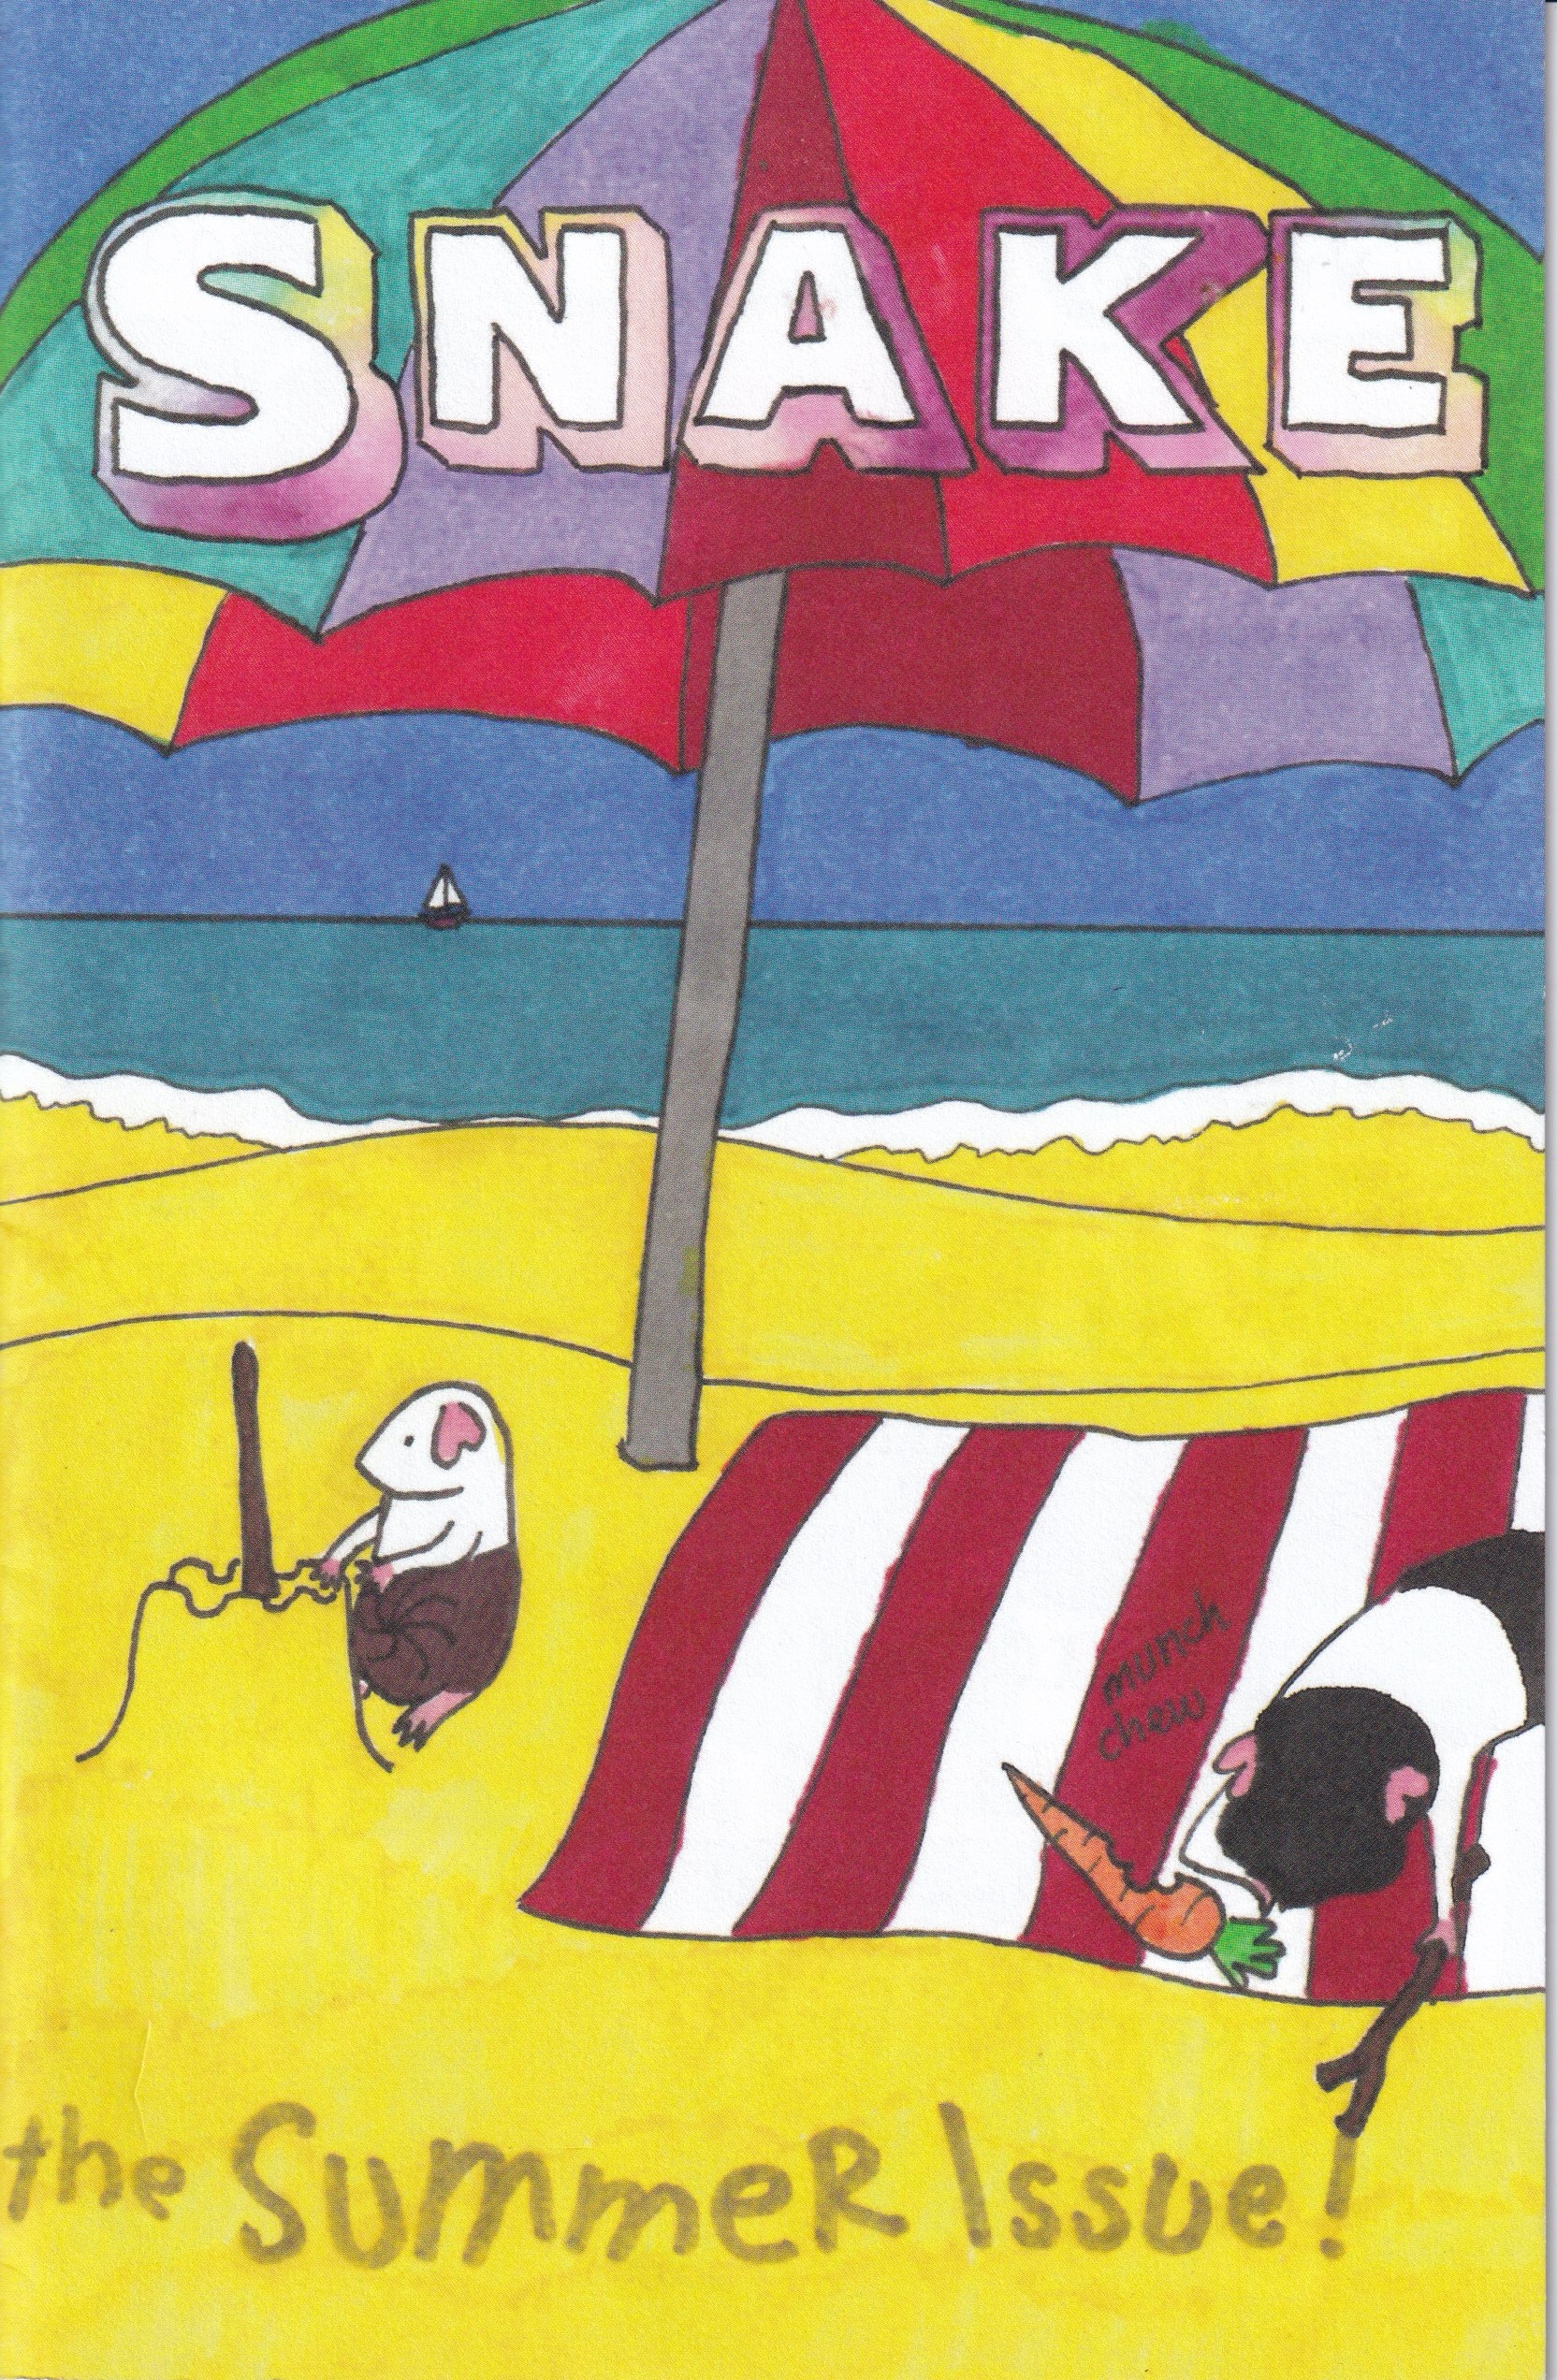 The cover of the Summer Issue, showing two guinea pigs lounging on a beach under a colorful umbrella.